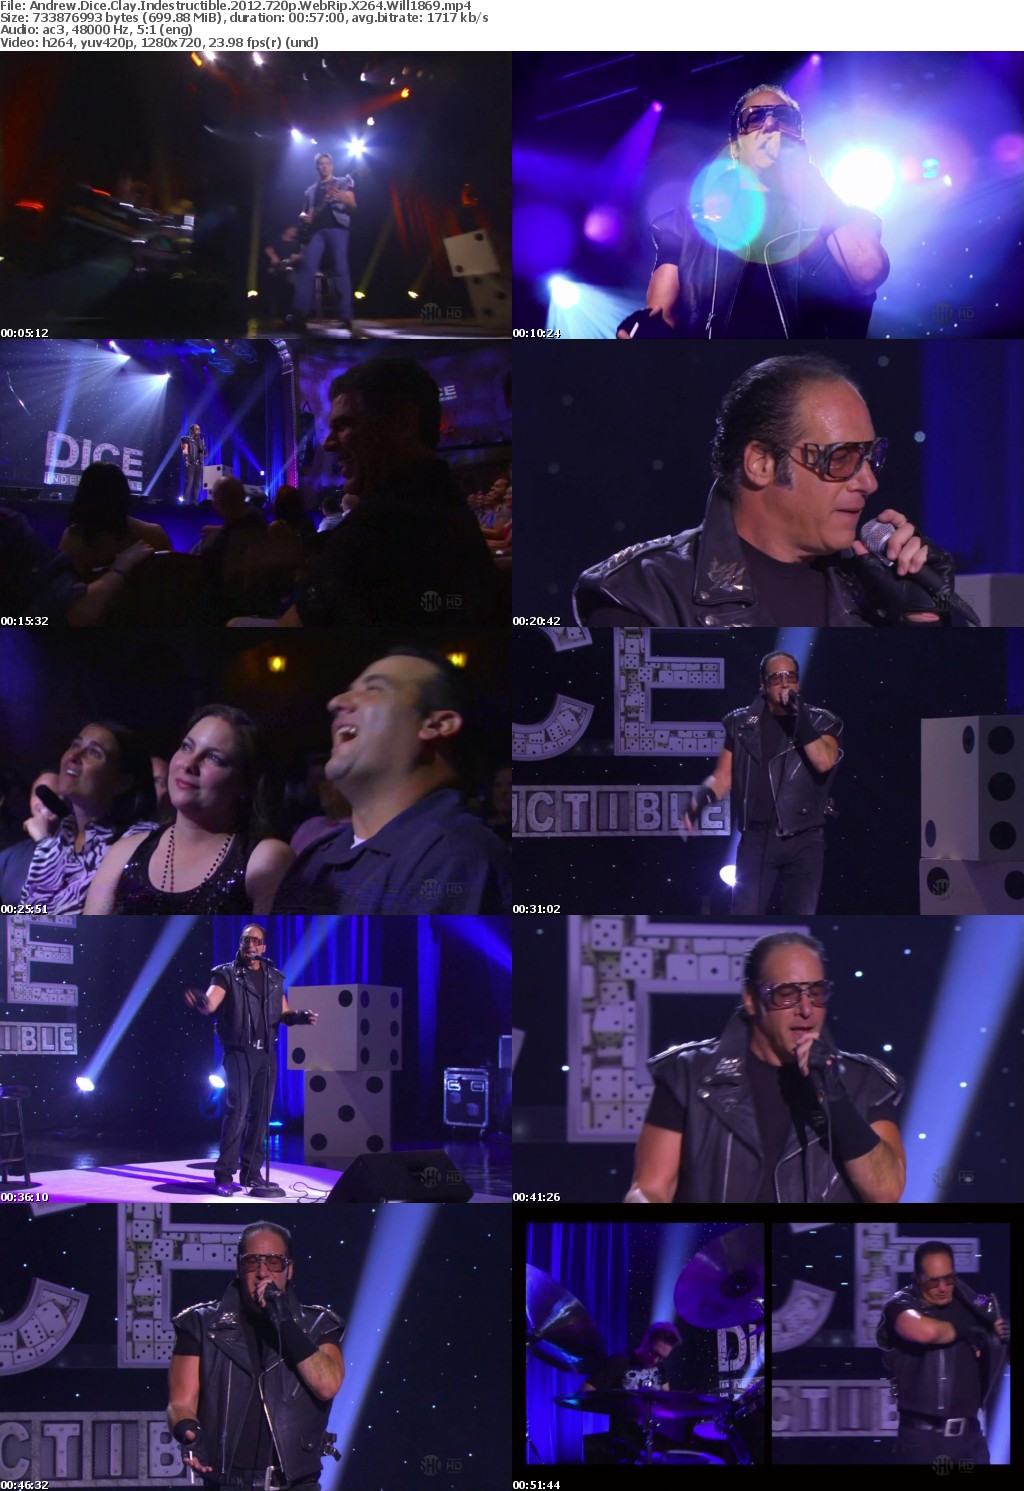 Andrew Dice Clay Indestructible 2012 720p WebRip X264 Will1869